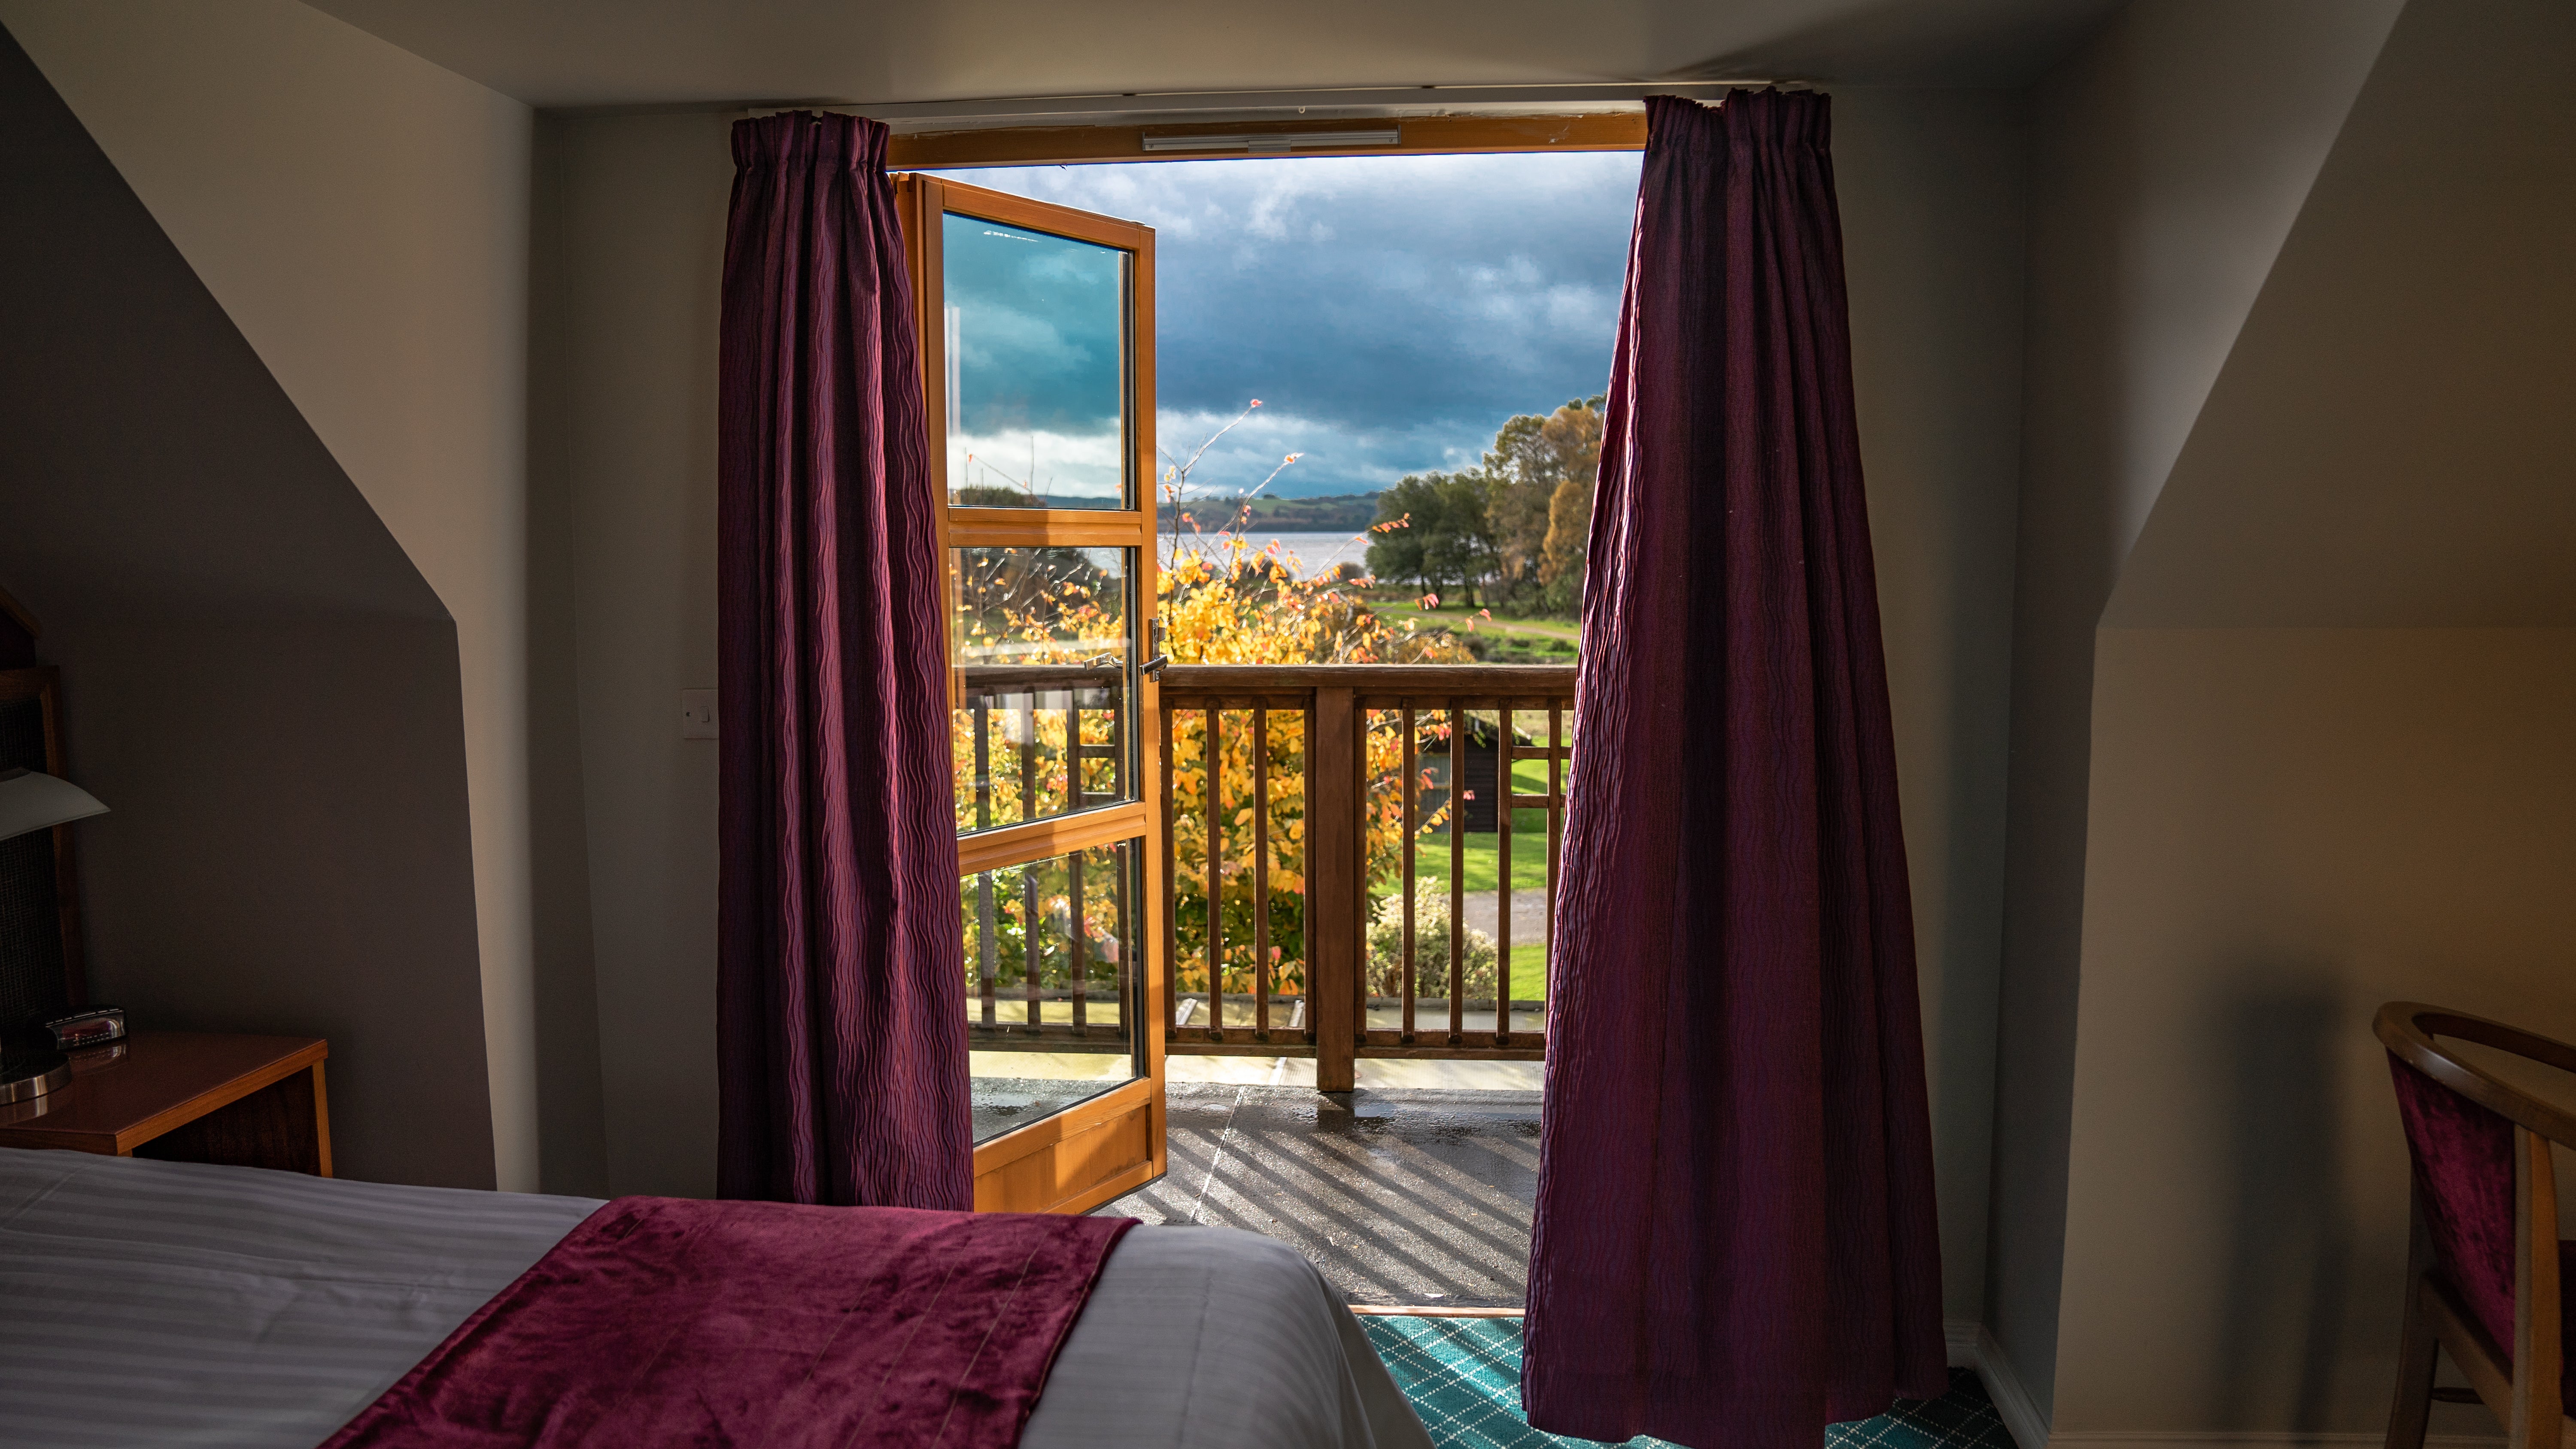 Wake up to a spectacular view on the waterfront